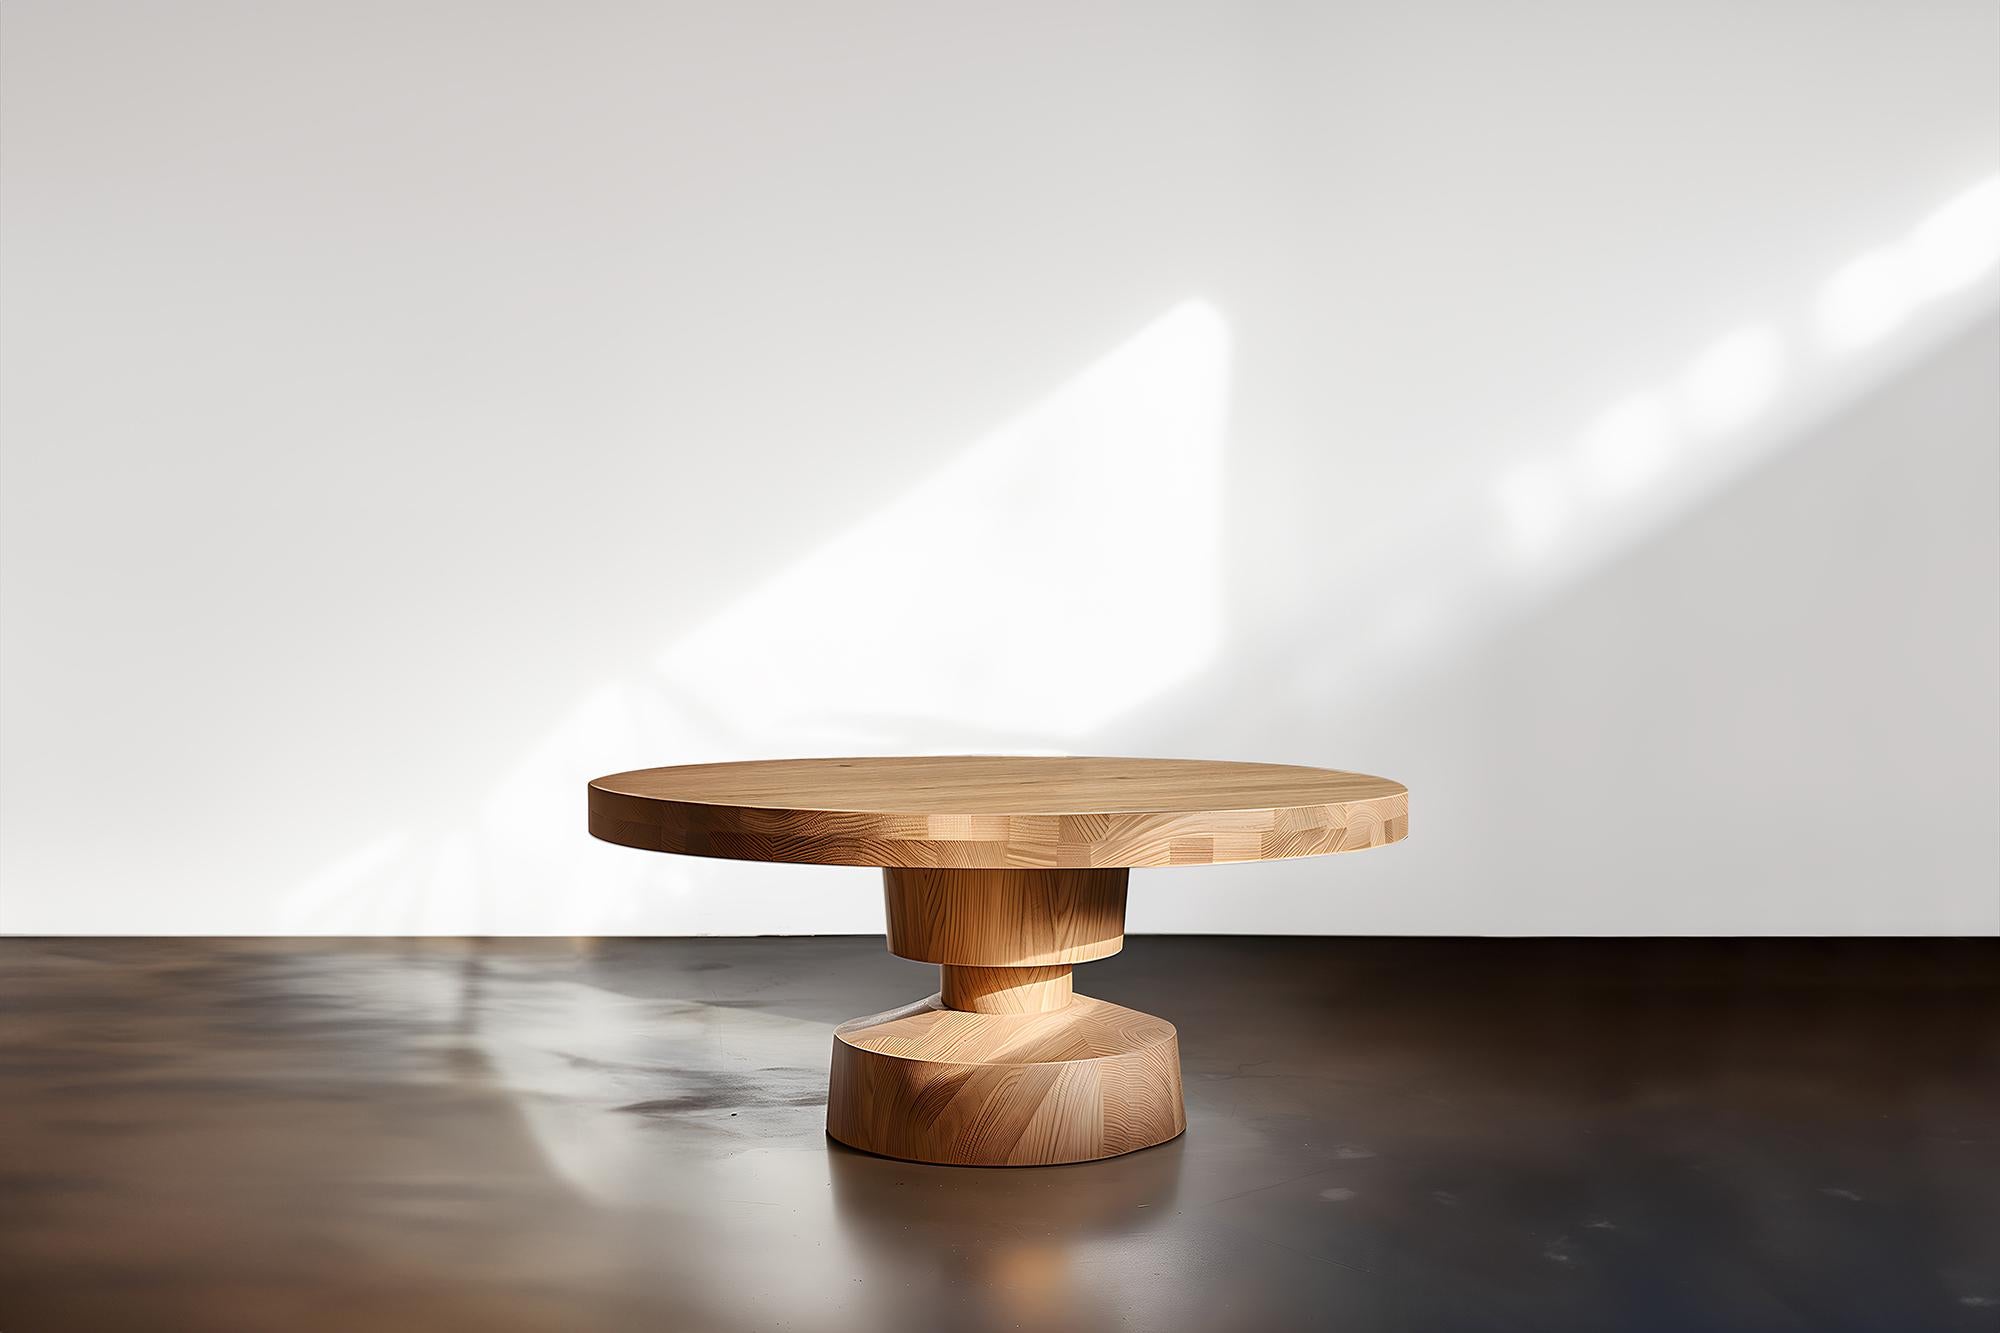 Solid Wood No05, Statement Serving Tables by Socle Series NONO
——

Introducing the 